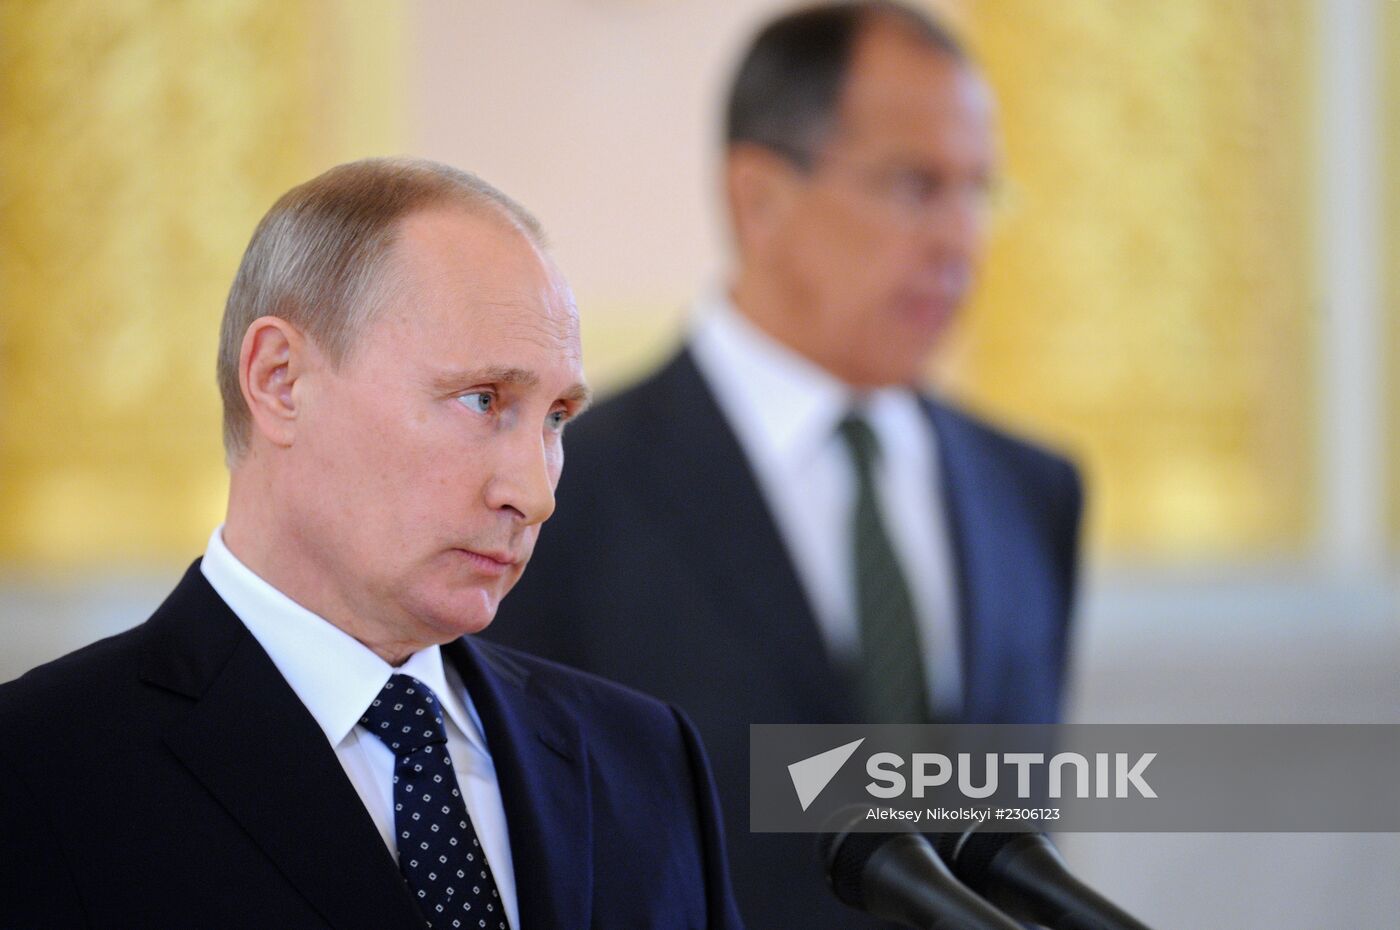 Ceremony of presenting credentials to Russian President Vladimir Putin at the Grand Kremlin Palace